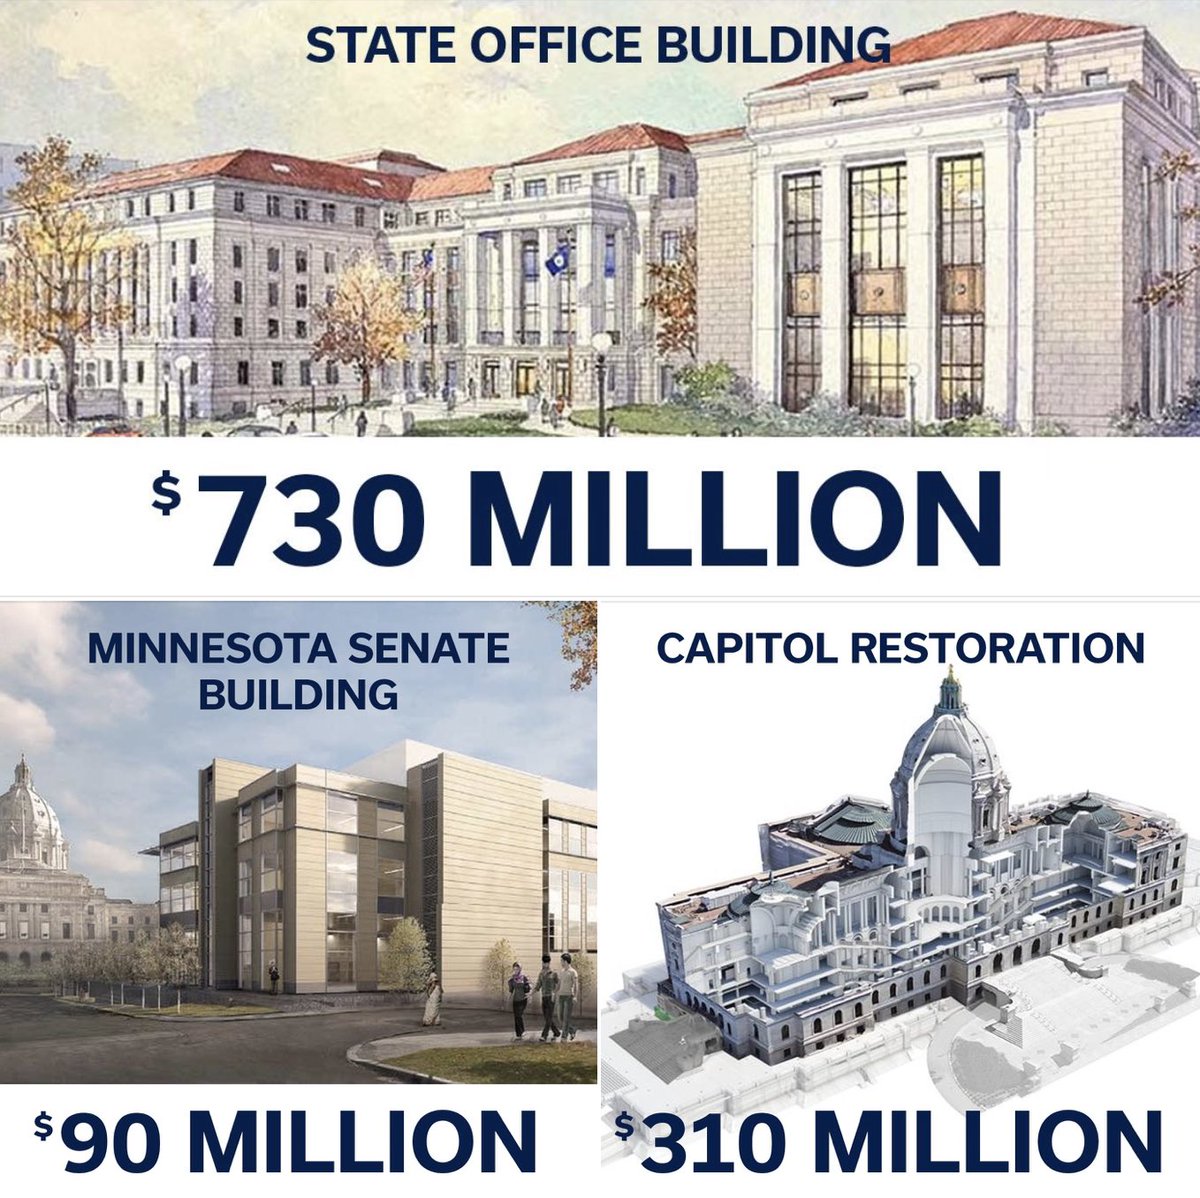 The State Office Building renovation is going to cost $730 million. That’s more than double the Capitol restoration and more than 8x what it took to build the Senate Building. Minnesotans shouldn’t be footing the bill for a luxury office building for 134 politicians. #mnleg